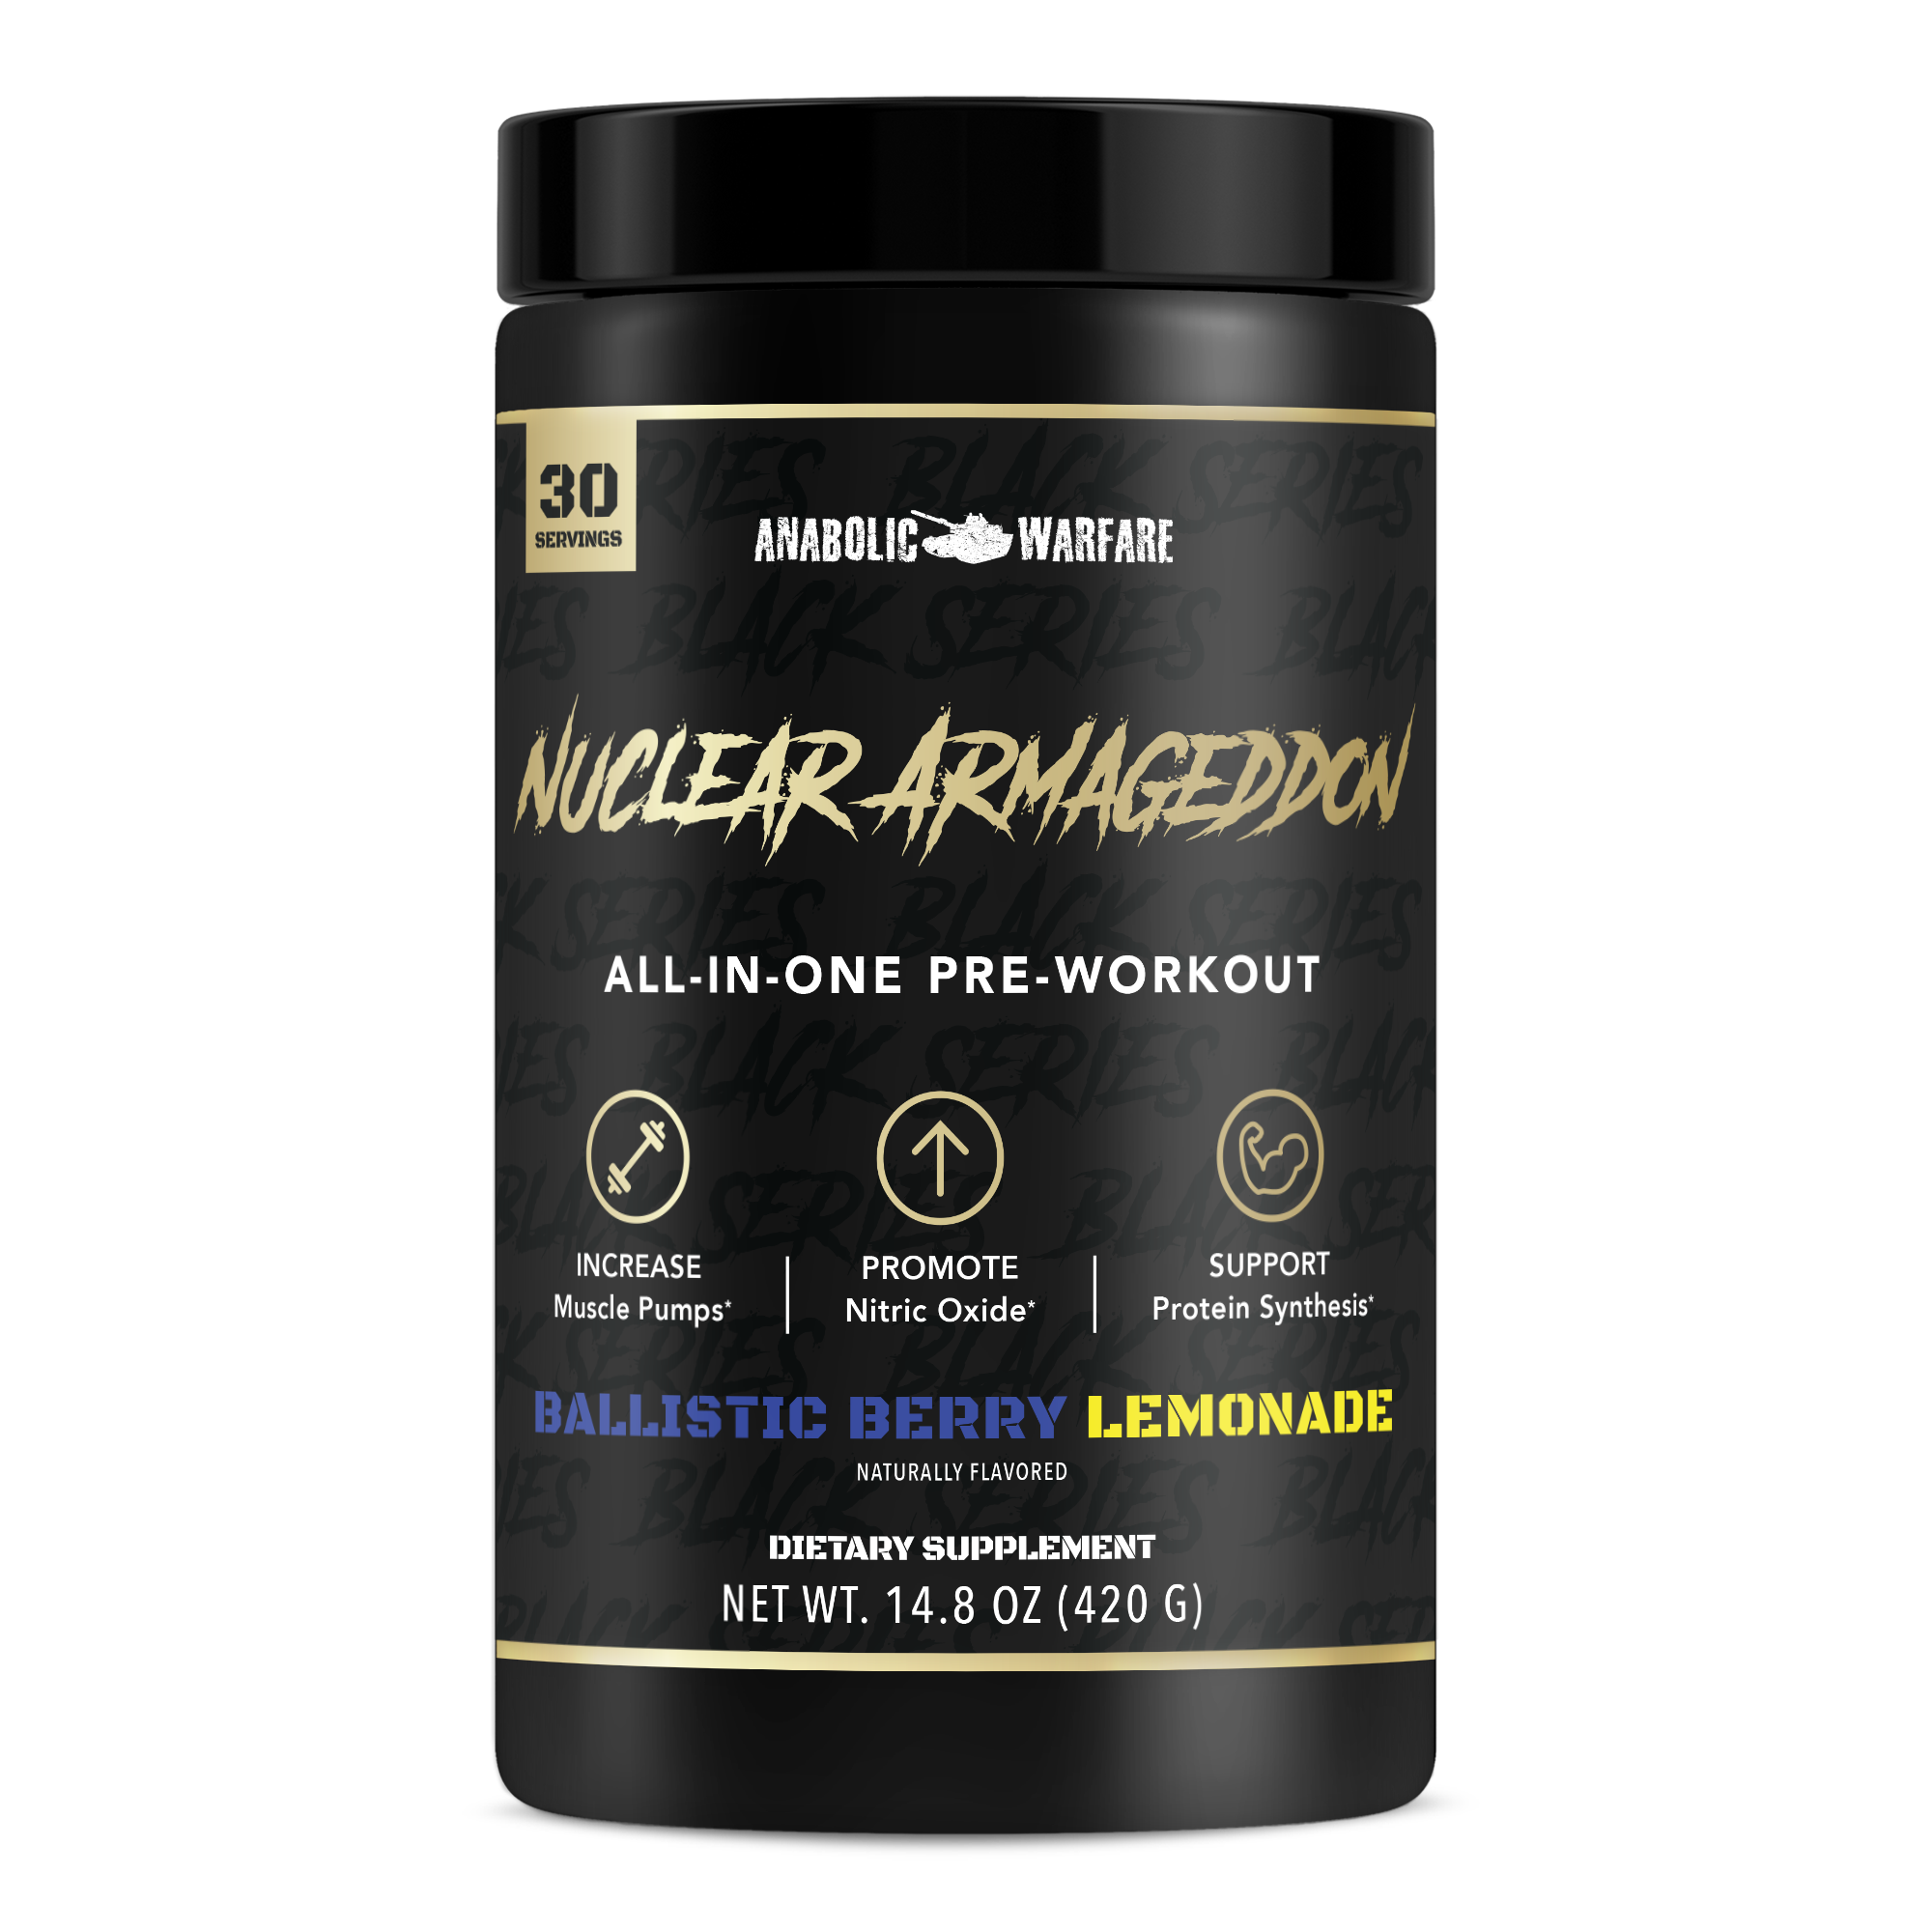 LU ALL-IN-ONE PRE-WORKOUT YENOR 7 INCREASE PROMOTE SUPPORT IR Ty Nitric Oxide* Protein Synthesis' L.LEMONADE NATURALLY FLAVORED DIETARY SUPPLEMENT NET WT. 14.8 0Z 420 G 